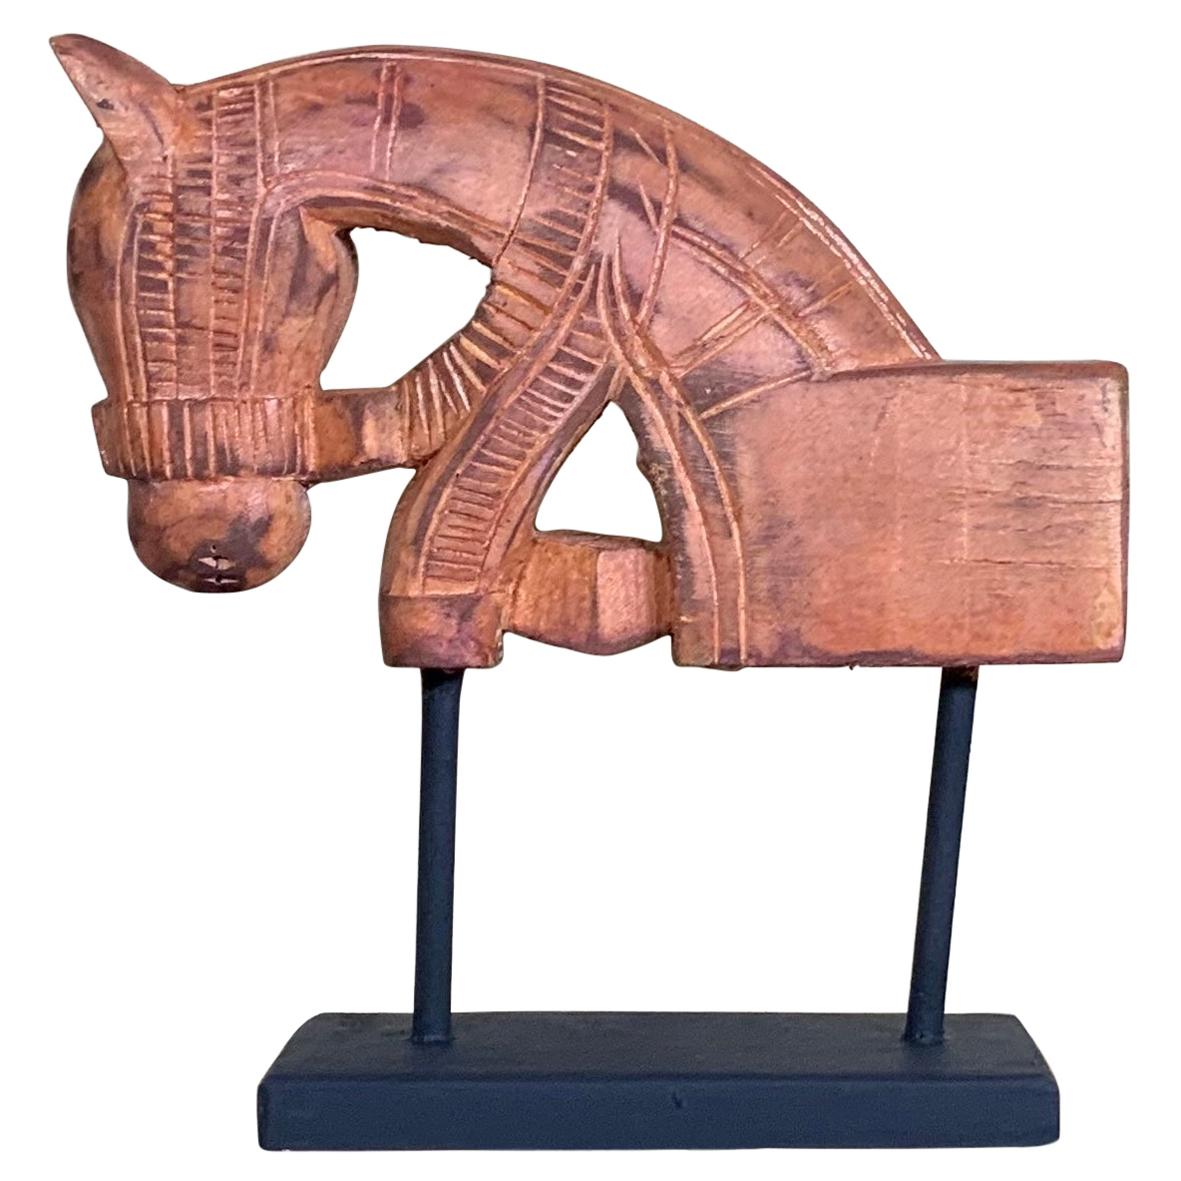 What is a wood horse?